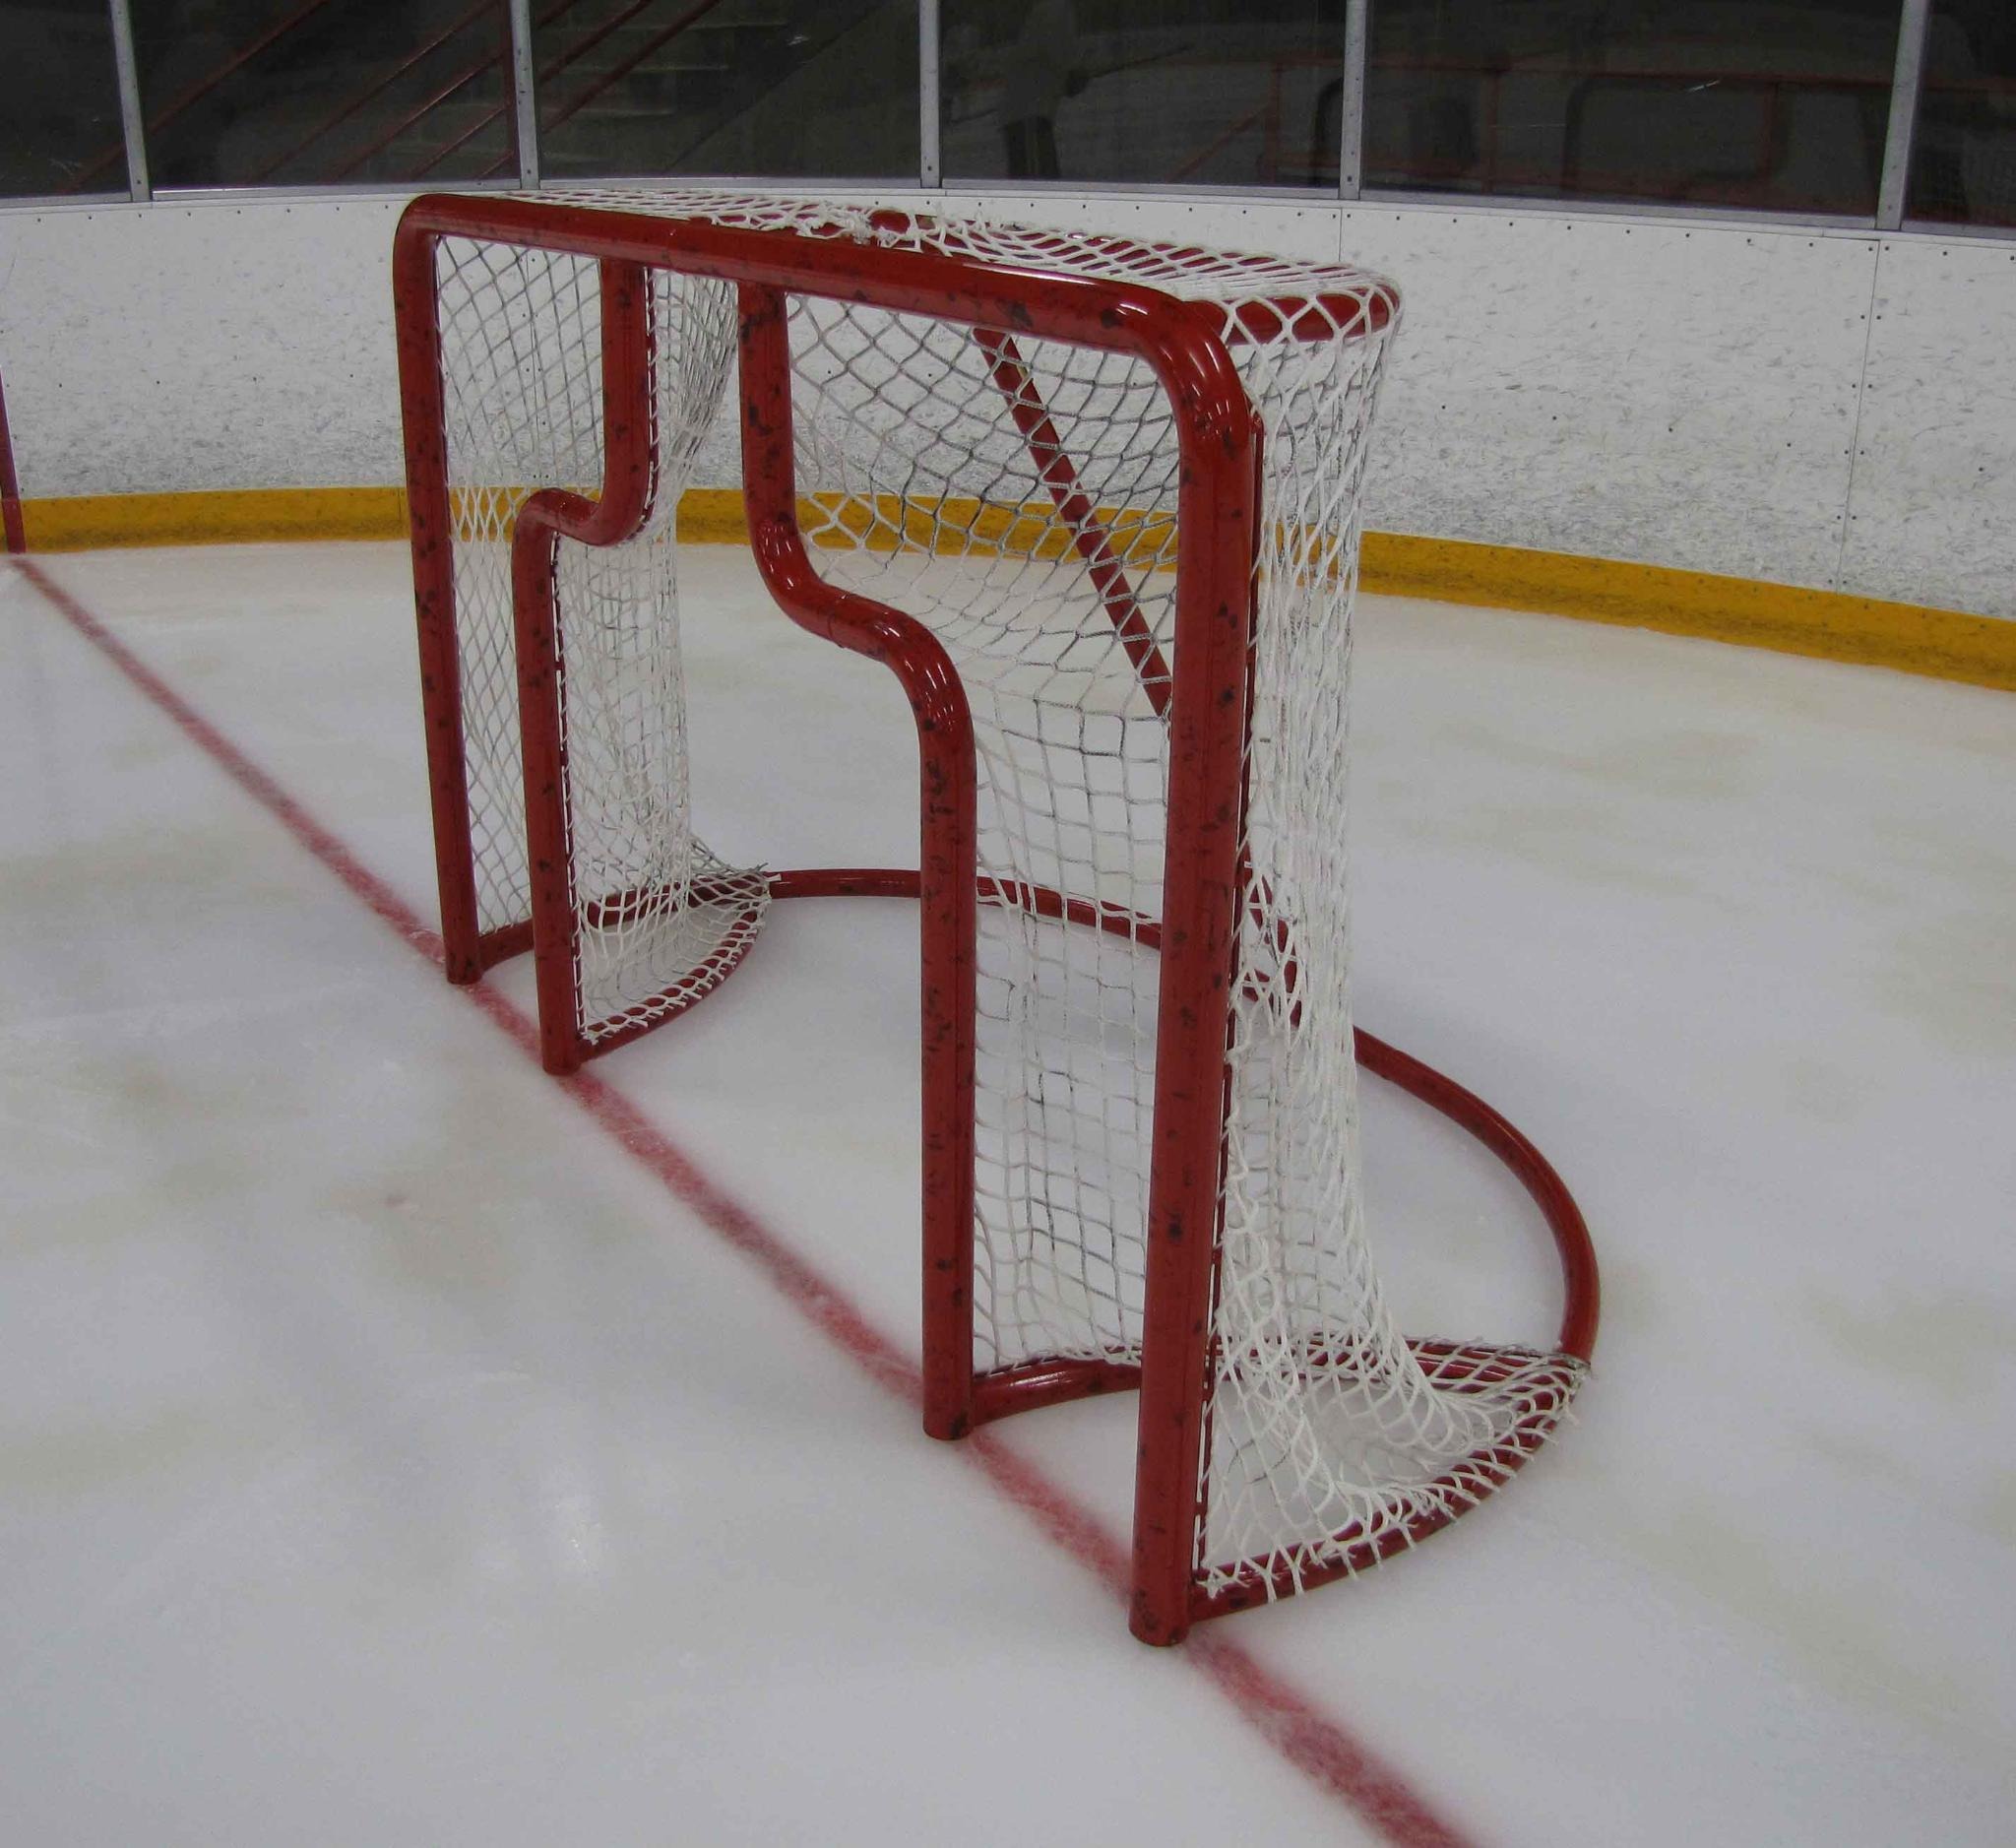 6’ x 4’ Steel Hockey Training Goal Front with Two Shooting Target Area, Each Side of Goalie; Welded Lacing Bar for Attaching Net; For Hockey Shooting Practice.